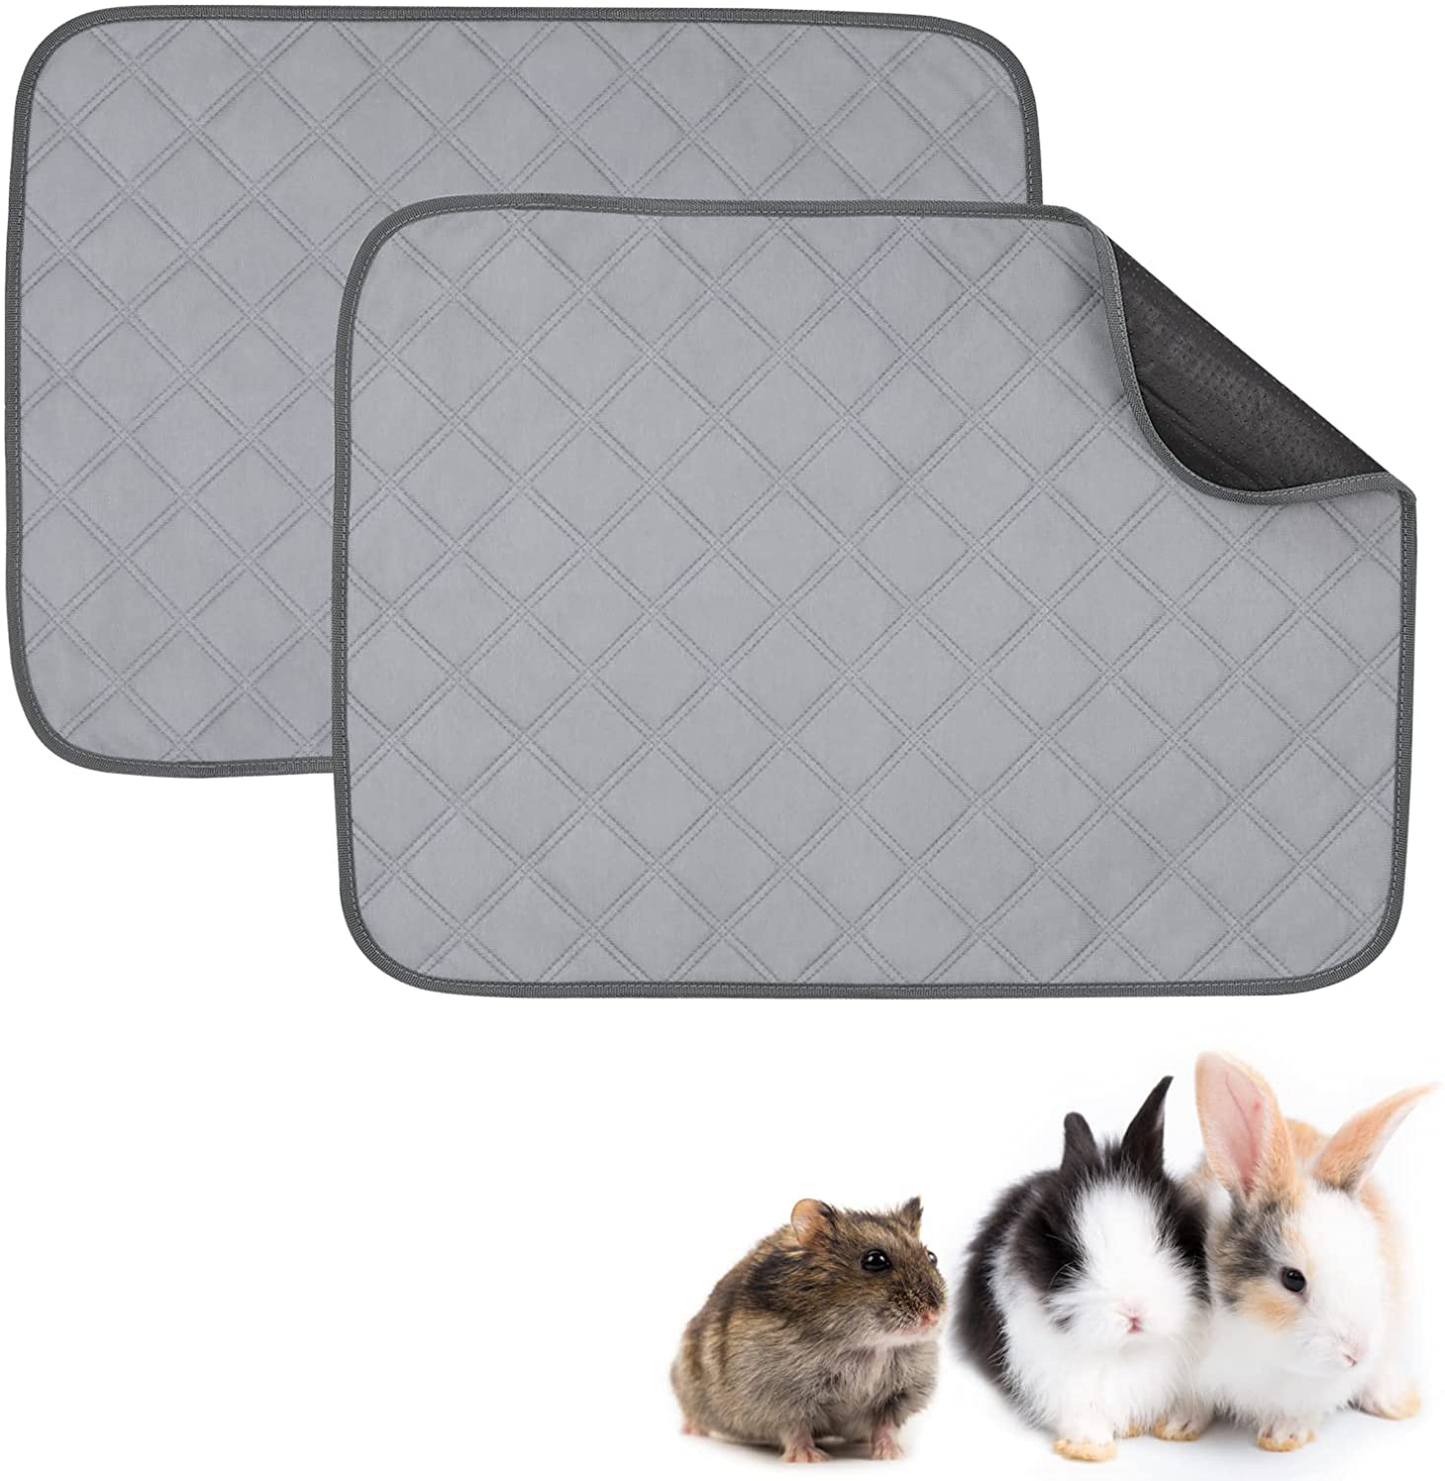 Vavopaw Guinea Pig Fleece Cage Liners, Pet Pee Pad, Washable Reusable Anti-Slip Leakproof Guinea Pig Pee Bedding Pad for Small Animals Rabbit Chinchilla Hamster Animals & Pet Supplies > Pet Supplies > Small Animal Supplies > Small Animal Bedding VavoPaw 2Pack  